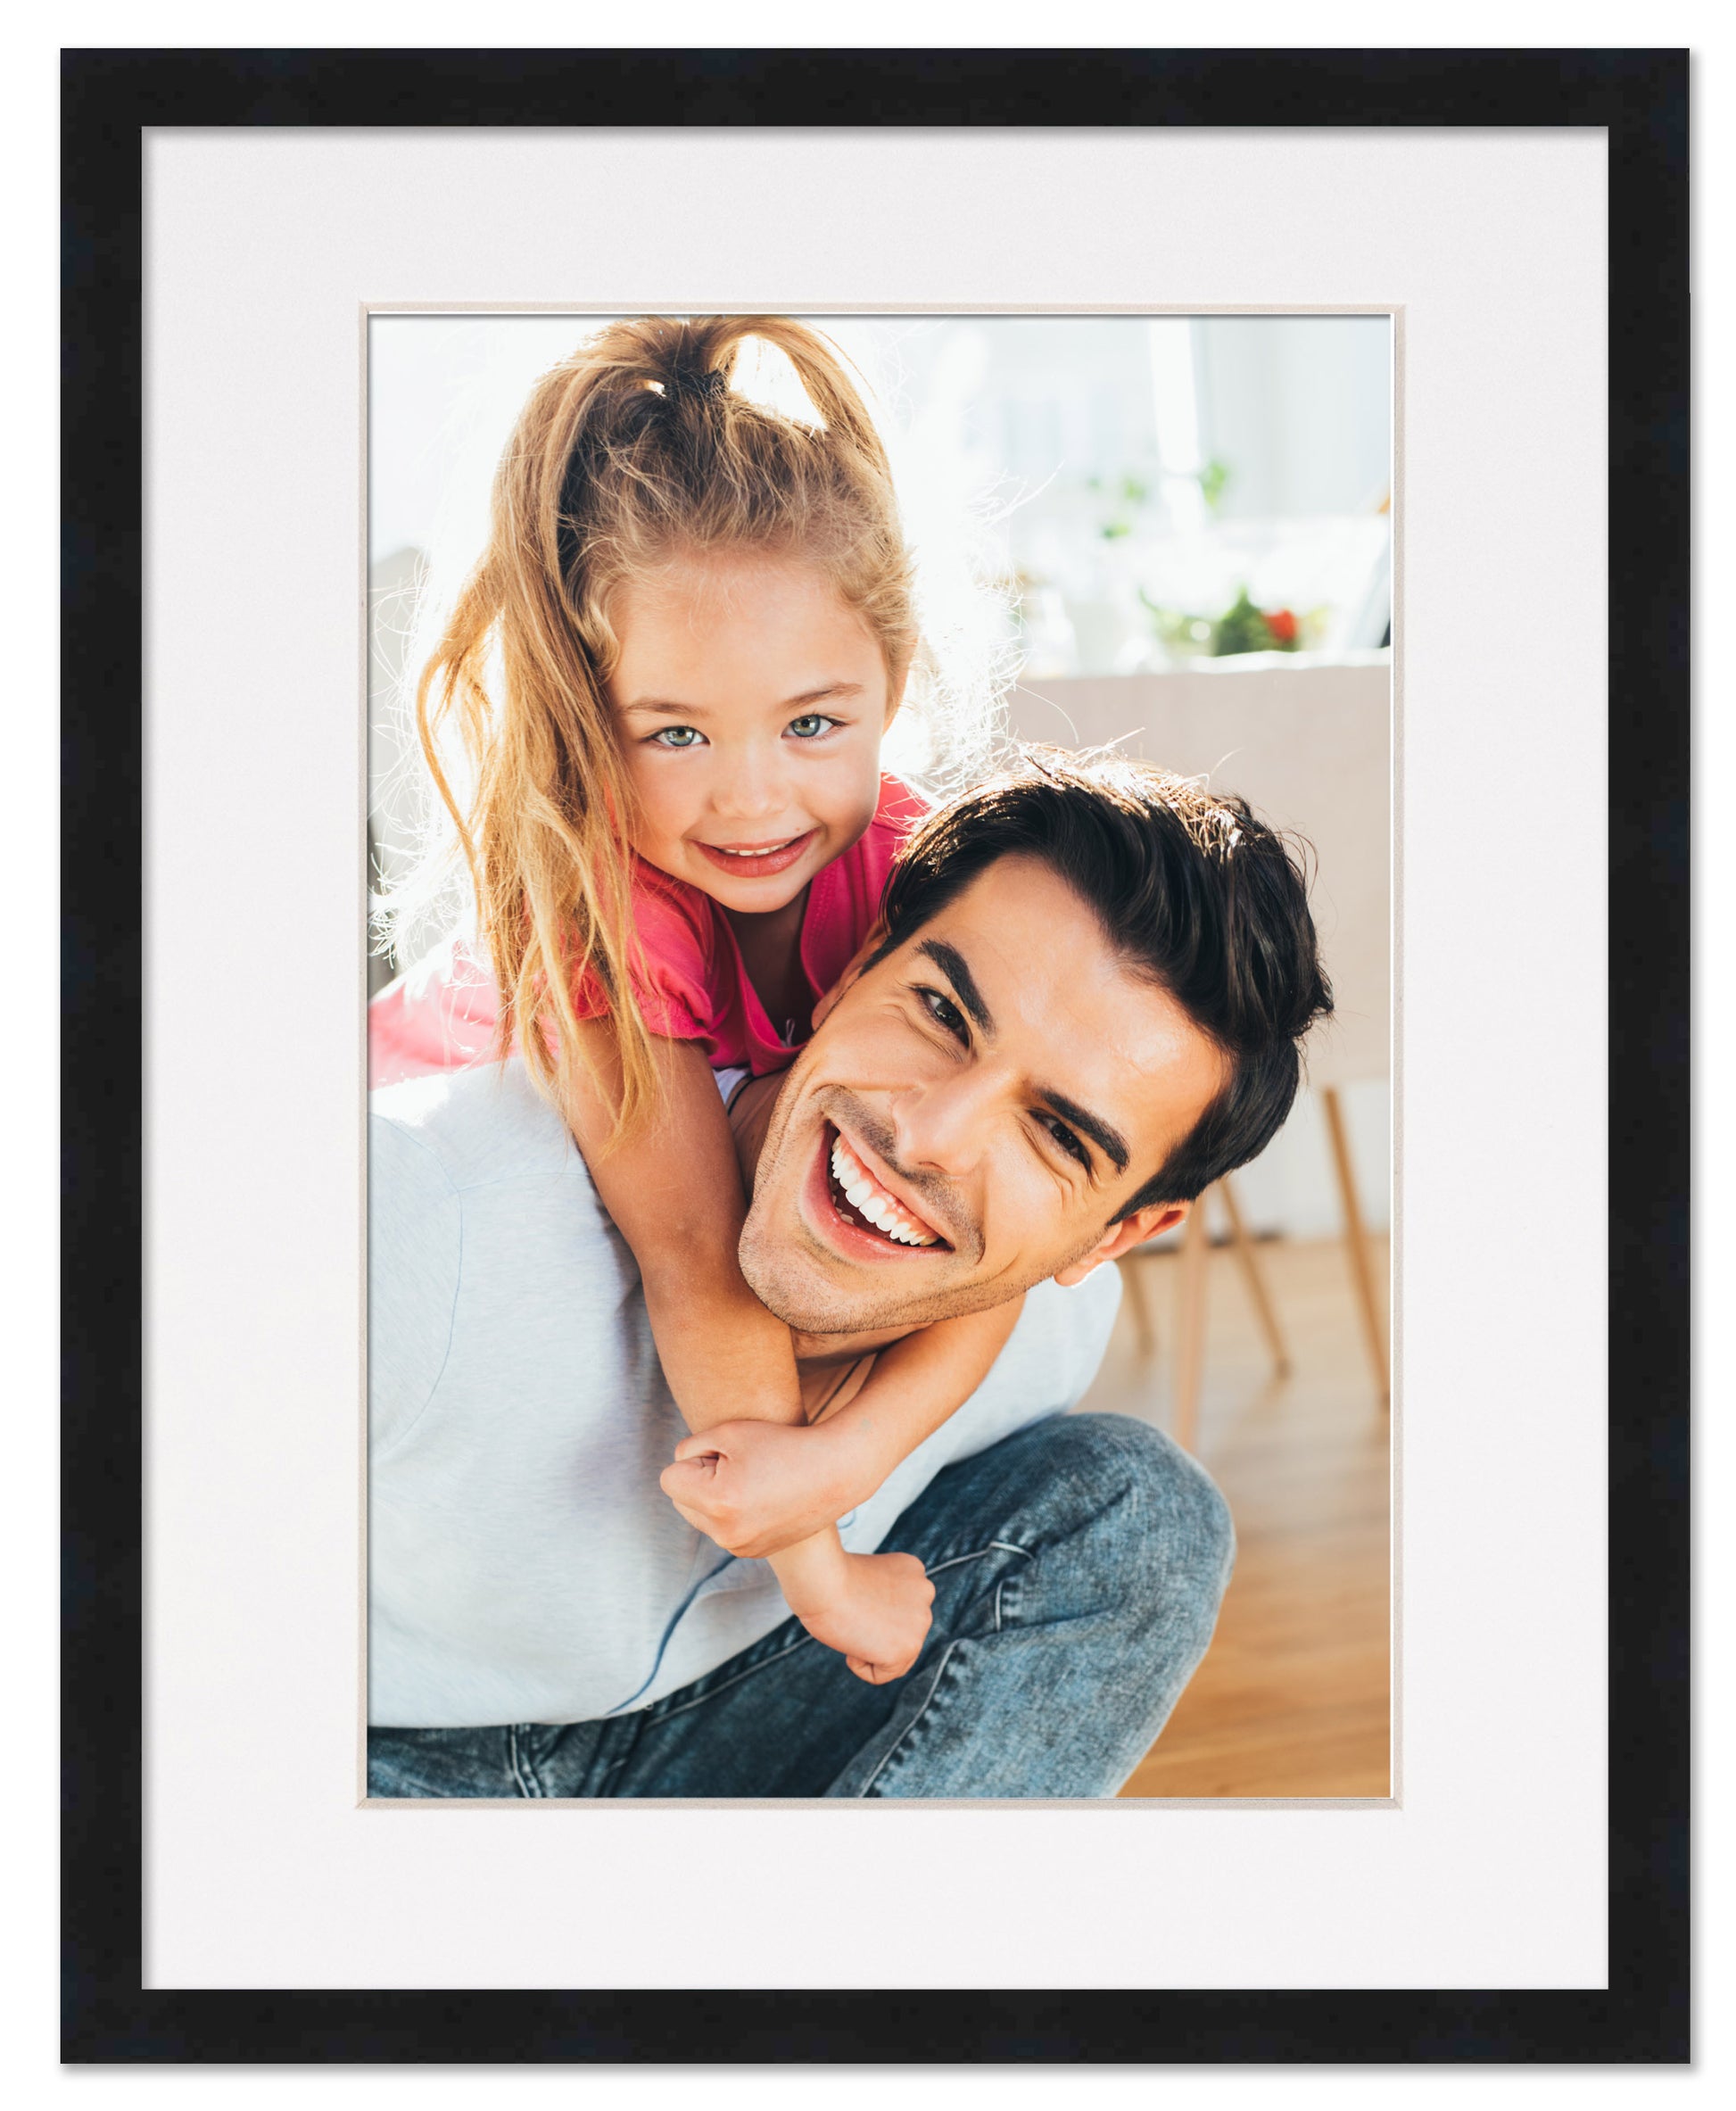 White 4x4 Frame With Mat - 8x8 Frame For a 4 x 4 Photo - Great for  Instagram Pictures